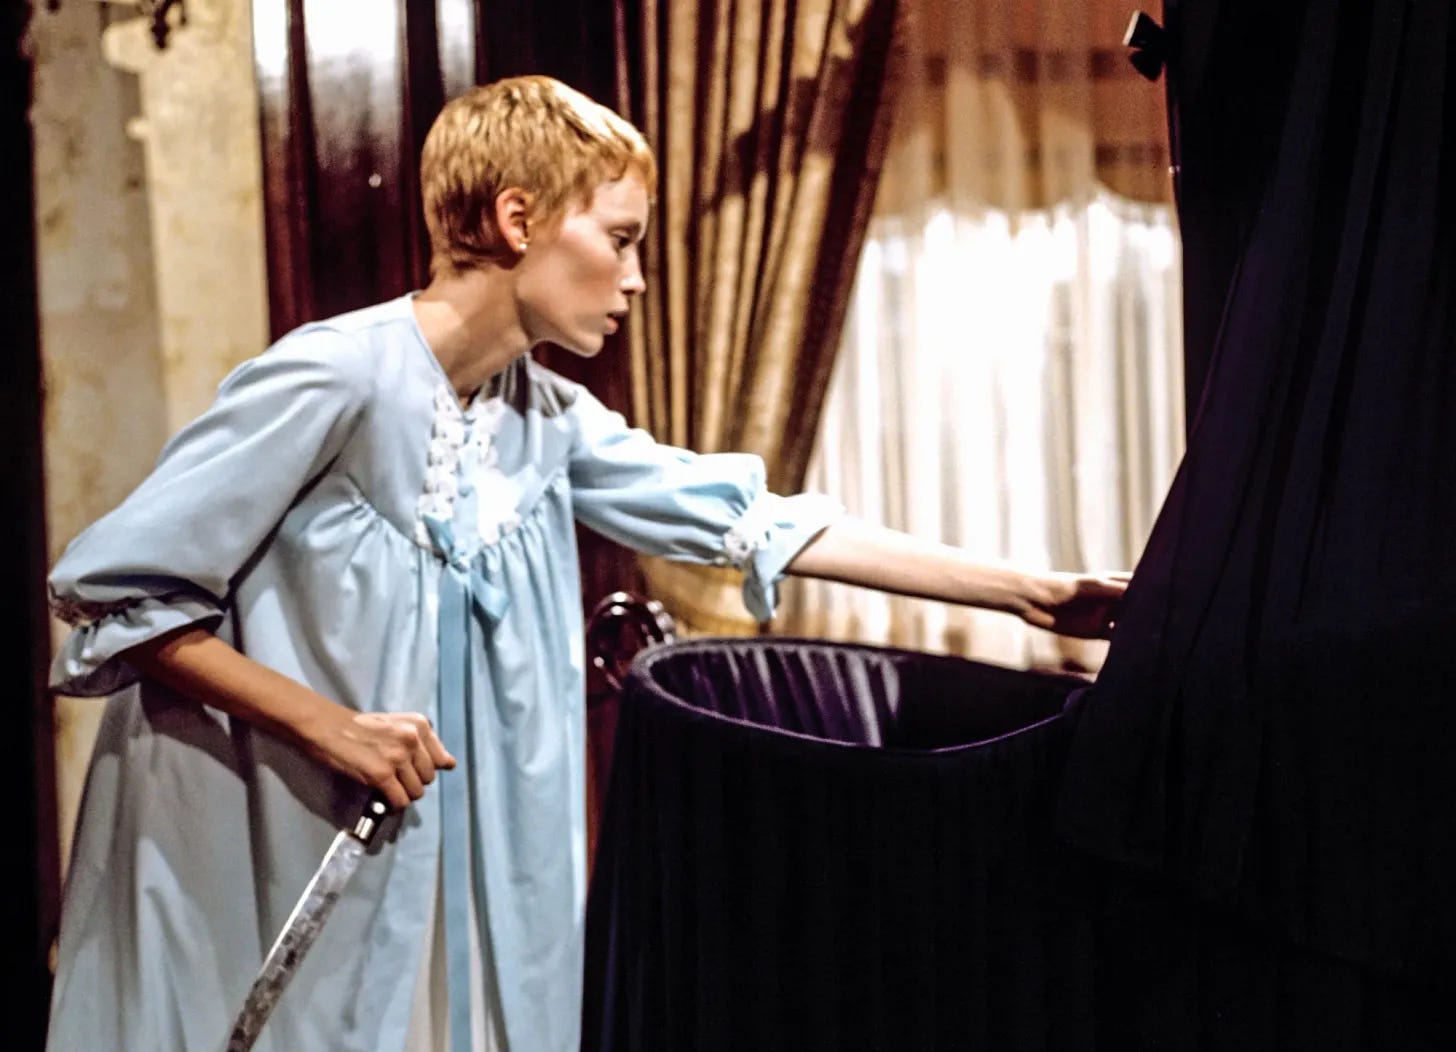 A white woman in a blue nightgown, played by actress Mia Farrow, stands holding a knife over a black crib